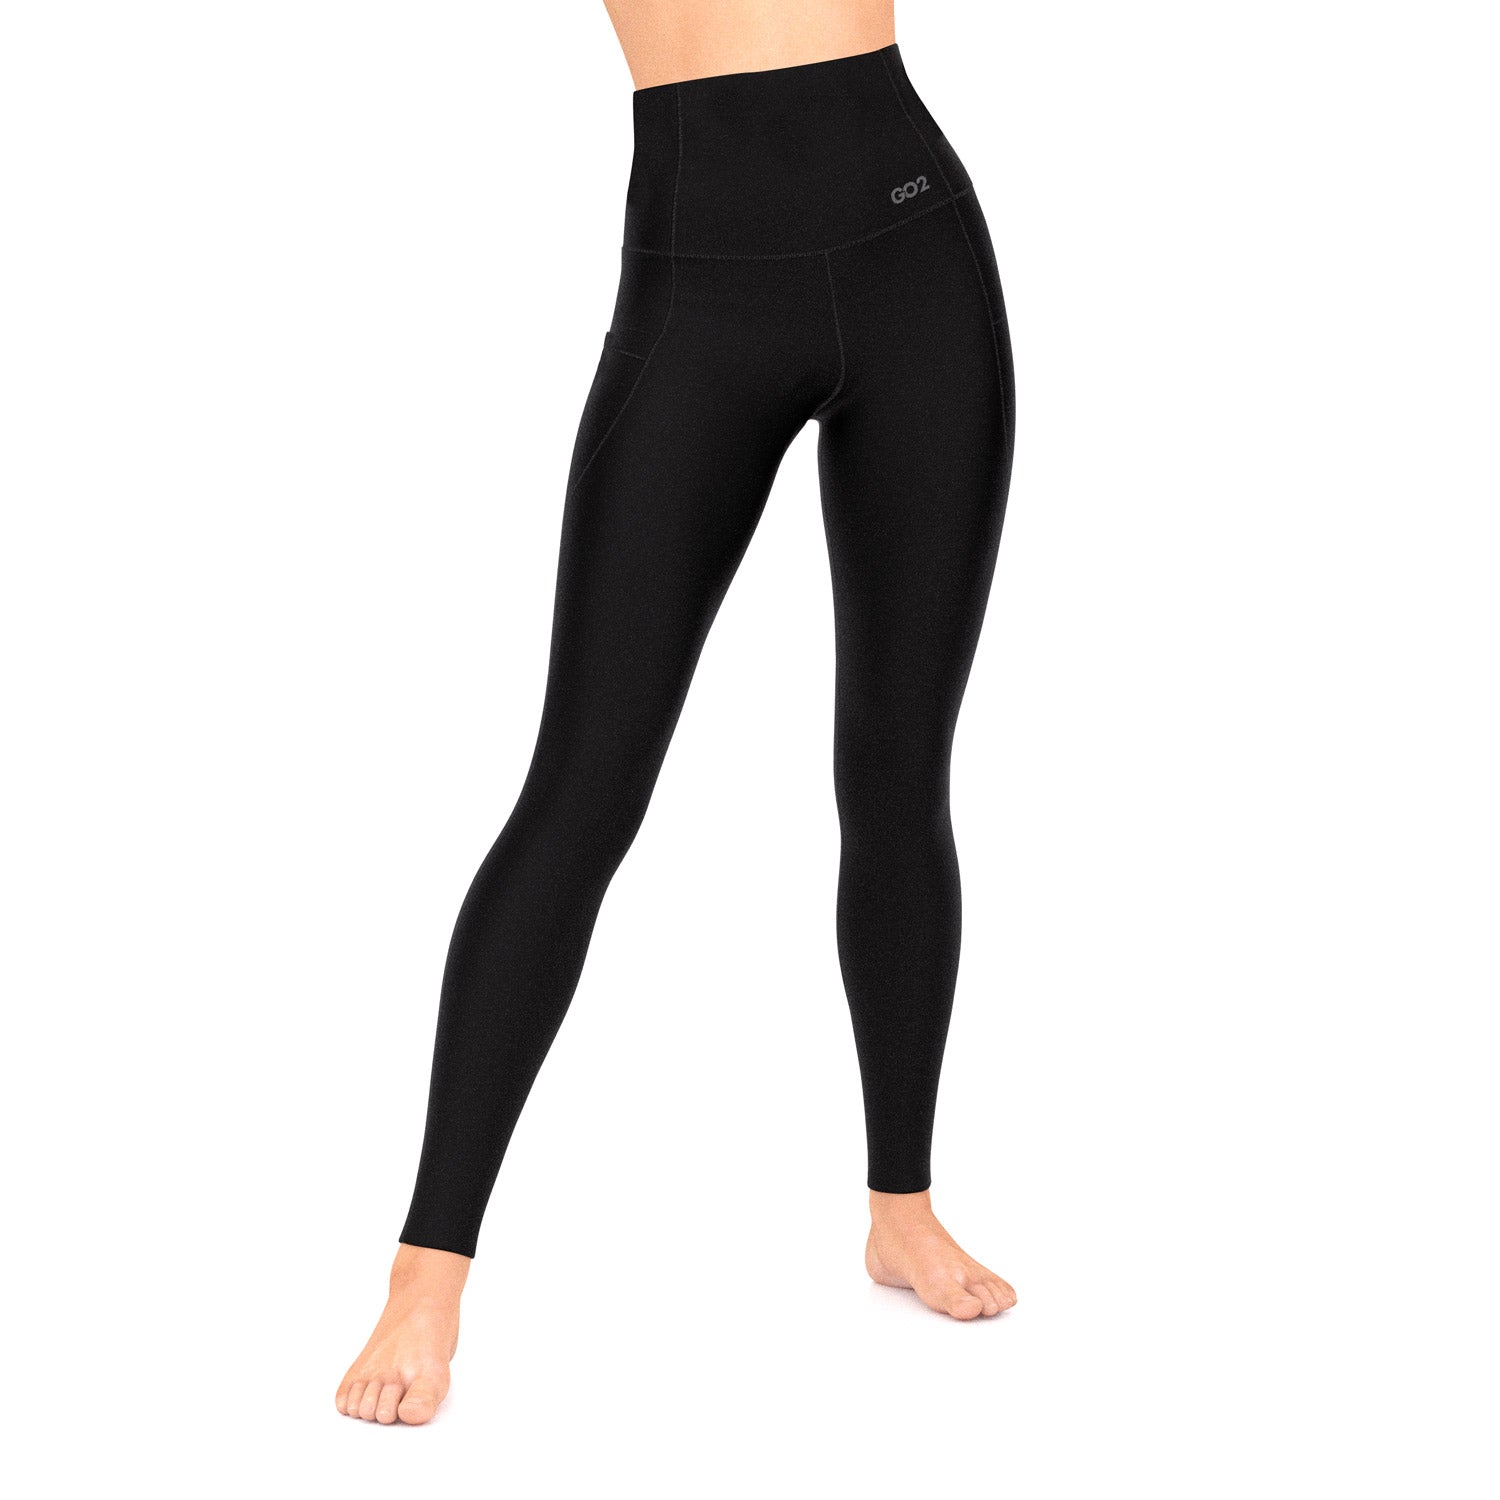 5pcs/Set Women's High Waist Yoga Pants With Pockets, Compression Running  Leggings Fitness Workout Tights